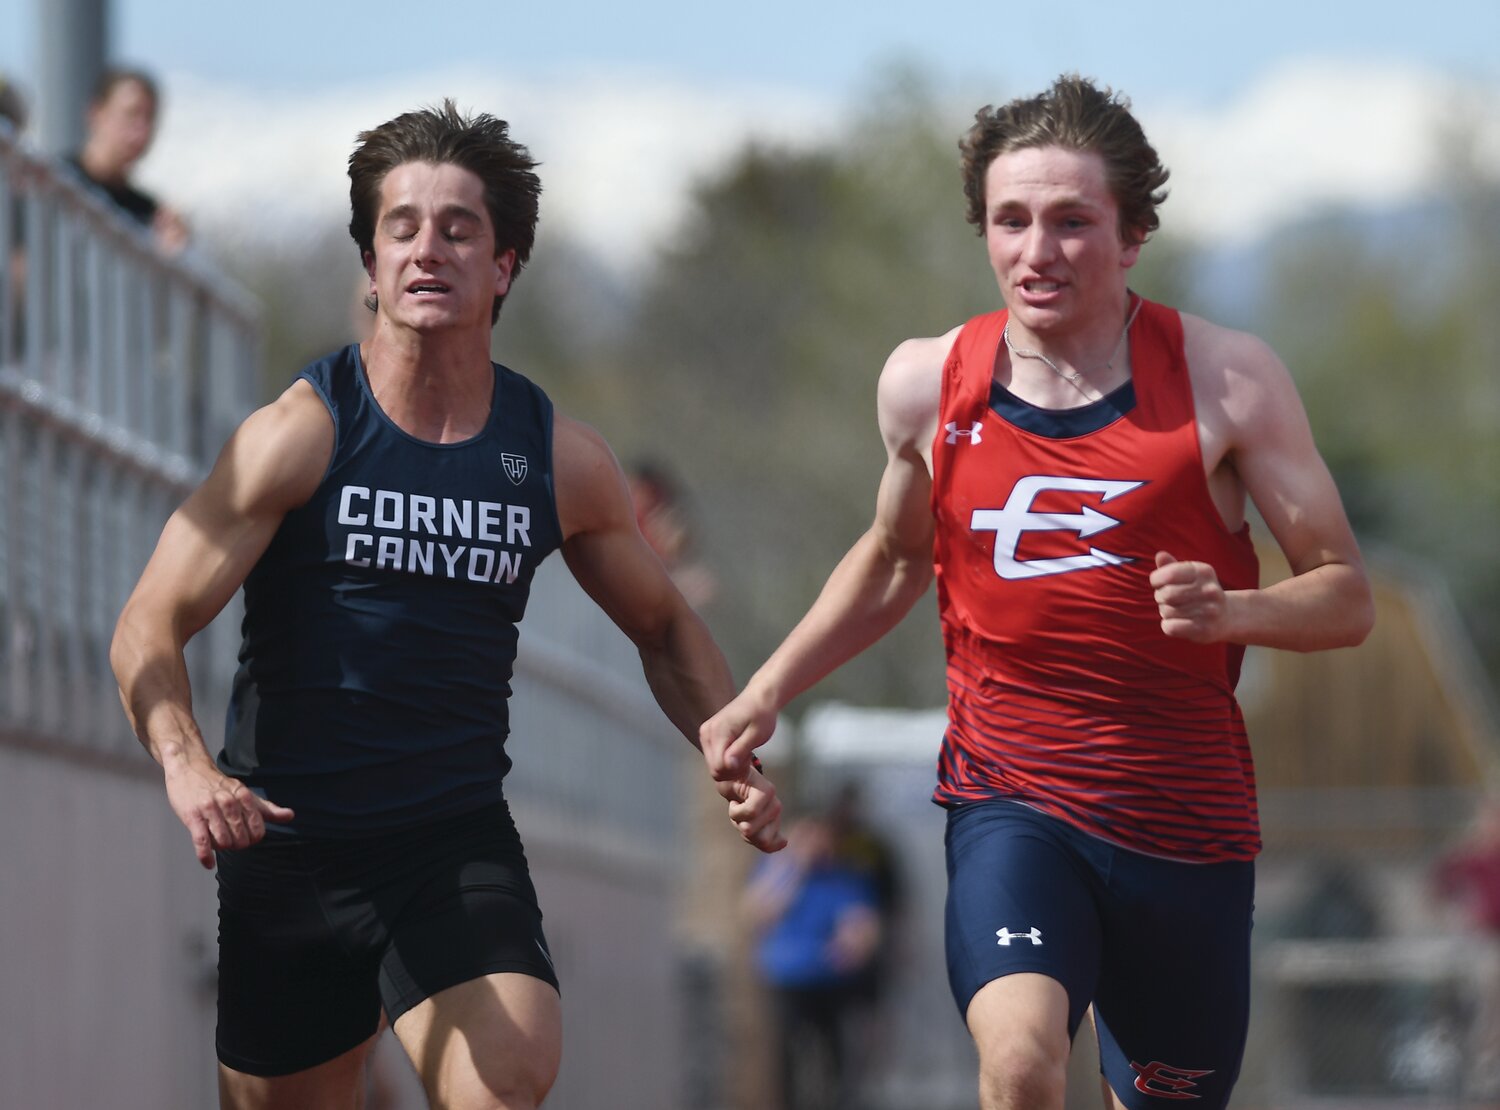 Red Devil sprinter Gabe Hutchinson keeps pace with Corner Canyon’s Preston Rasmussen in the invited 100 meters at Saturday’s Davis Invite in Kaysville, Utah. Hutchinson finished 7th.